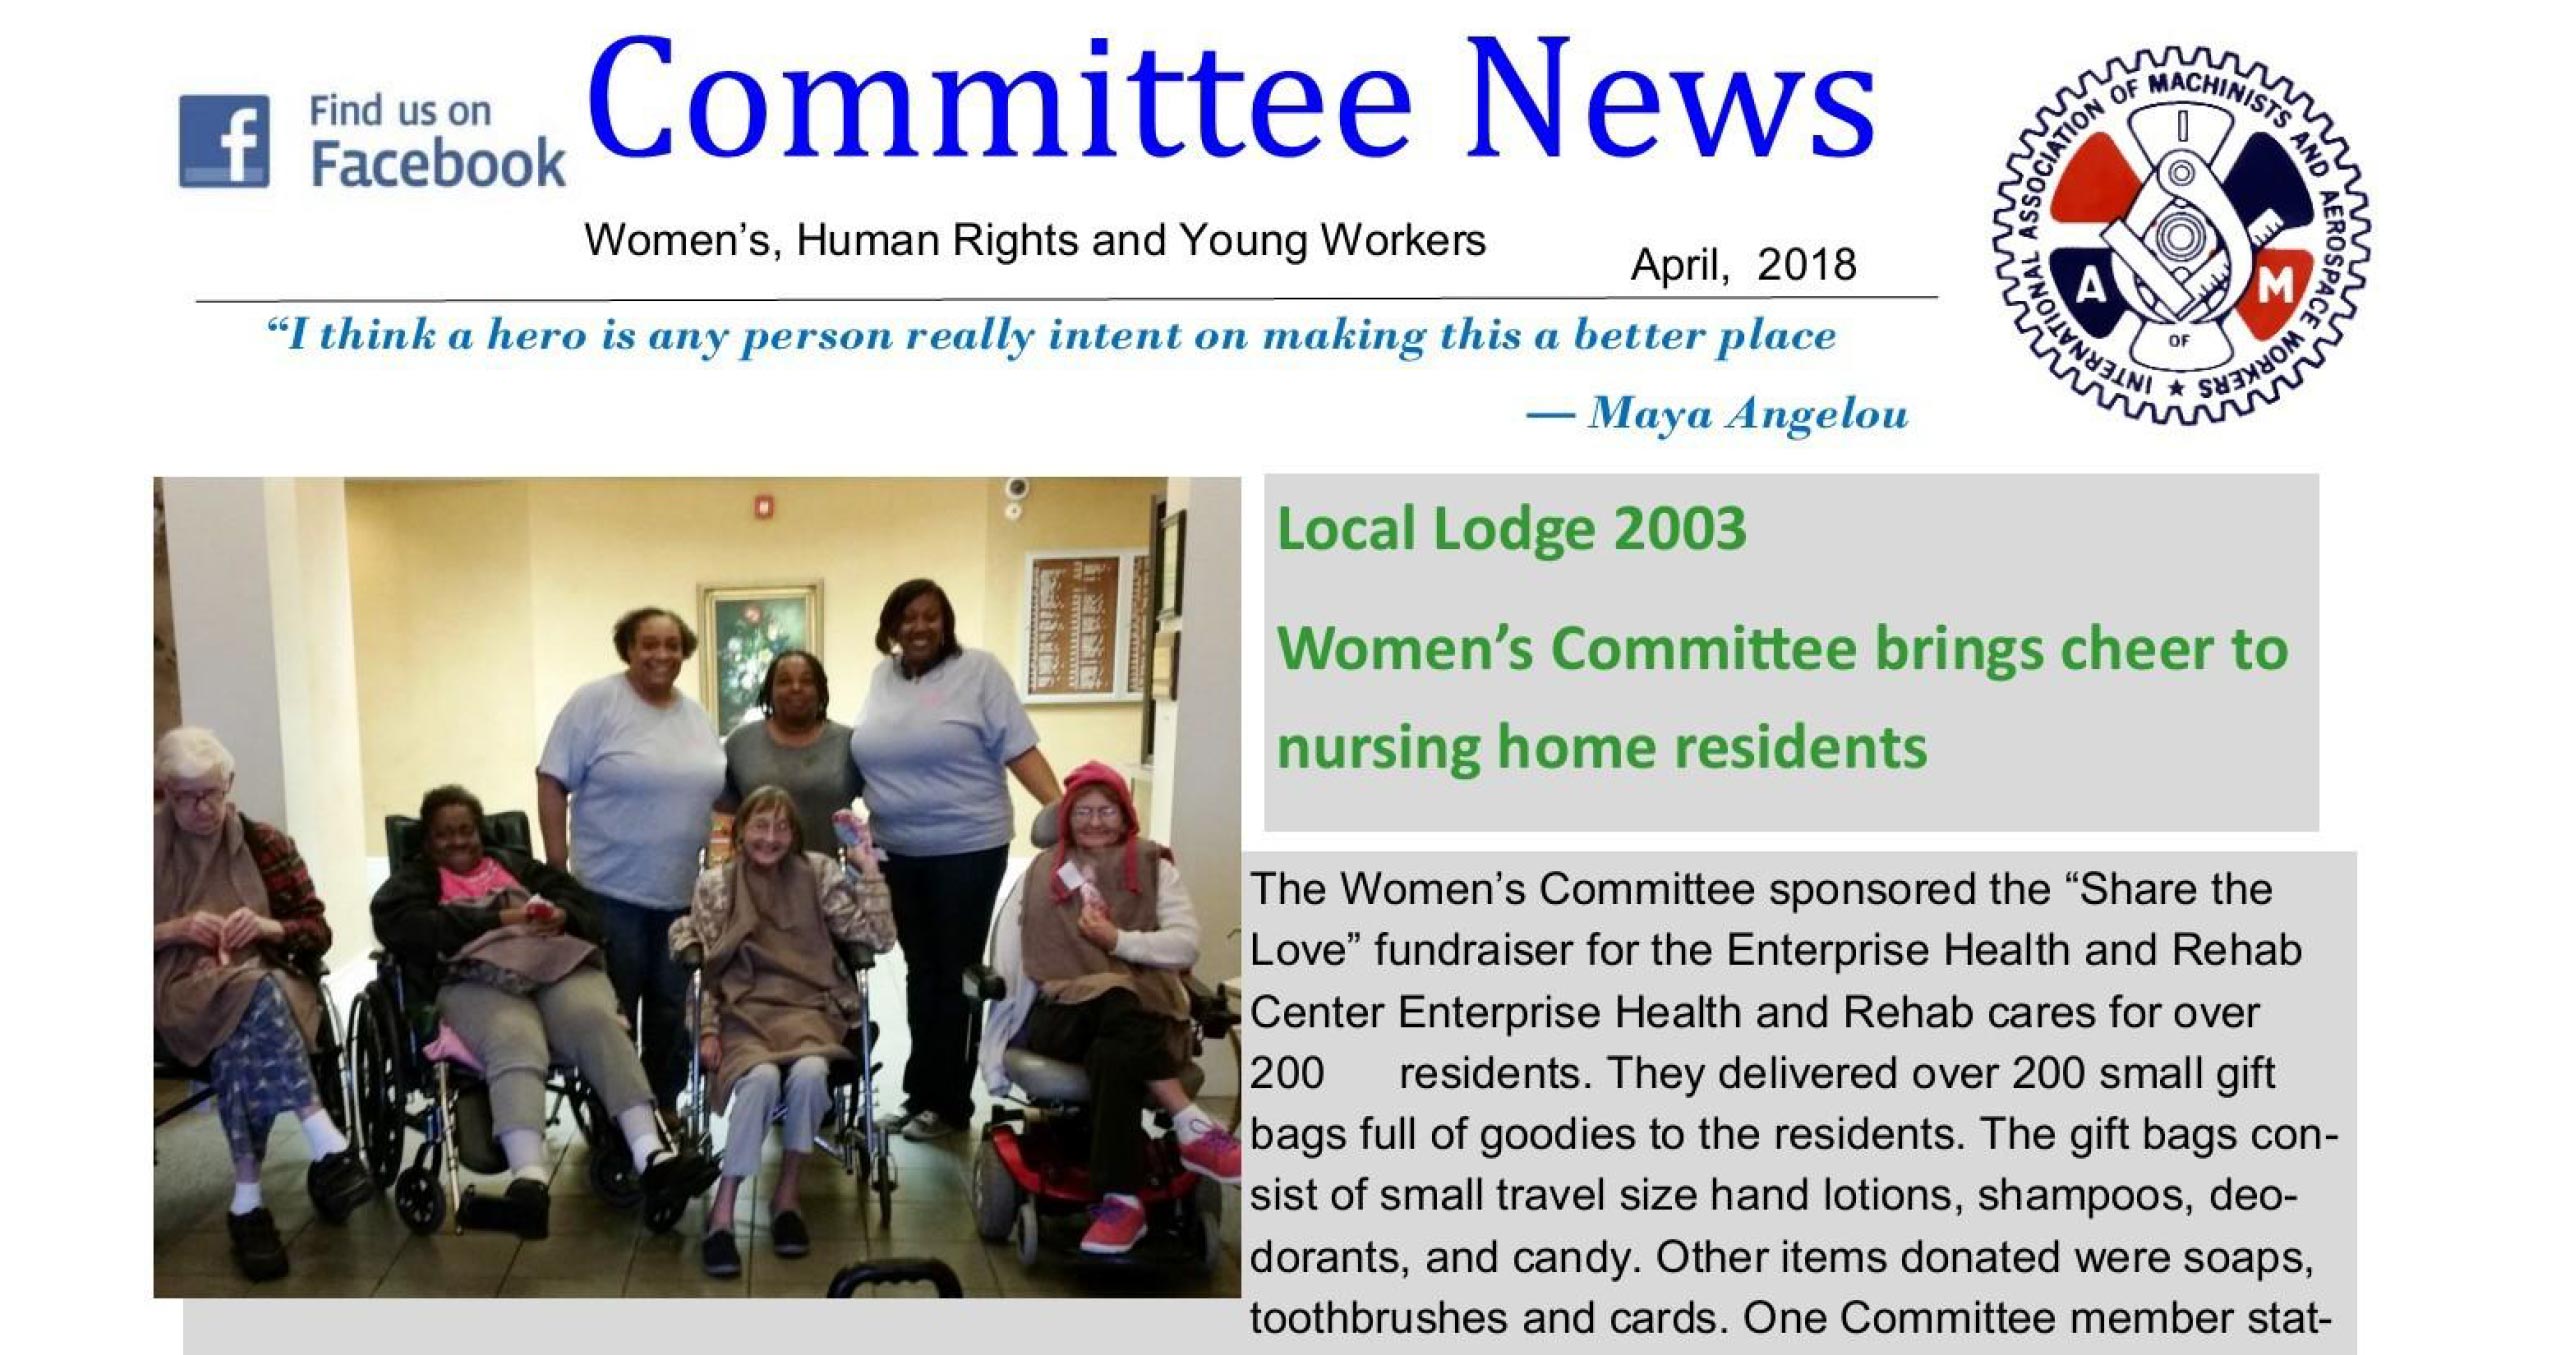 Committee News, April 2018